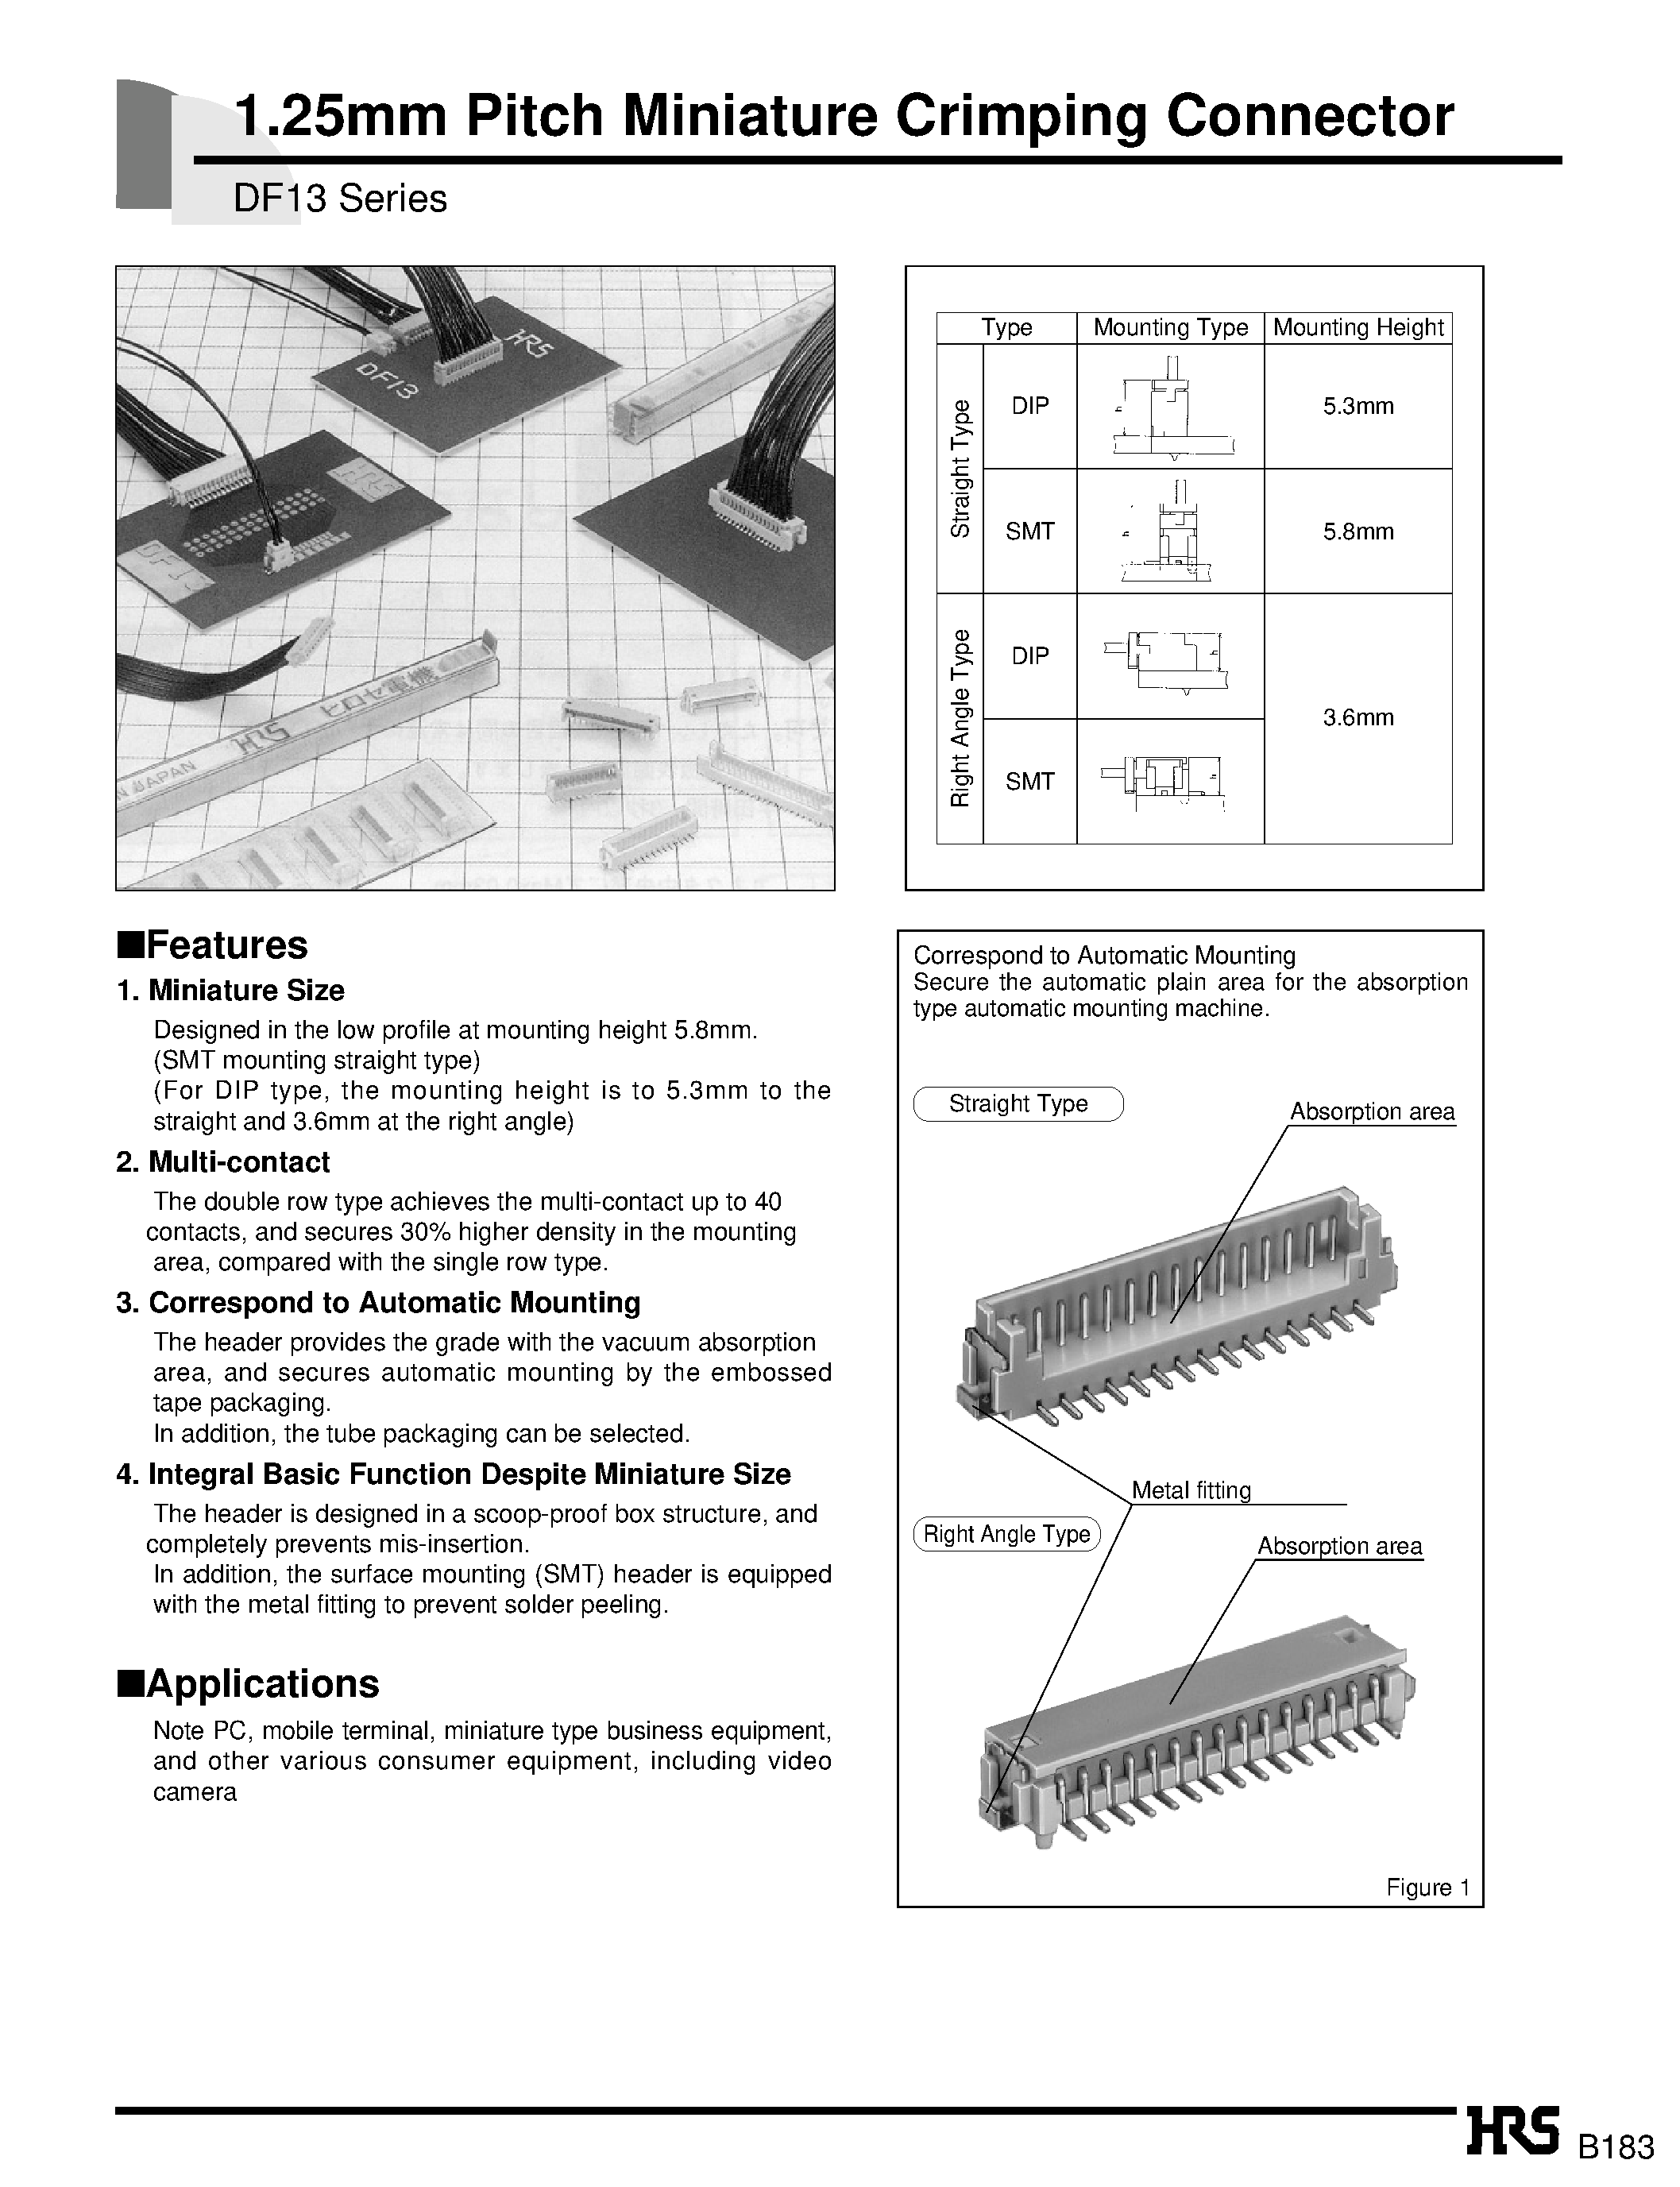 Datasheet DF13-12S-1.25DS - 1.25mm Pitch Miniature Crimping Connector page 1